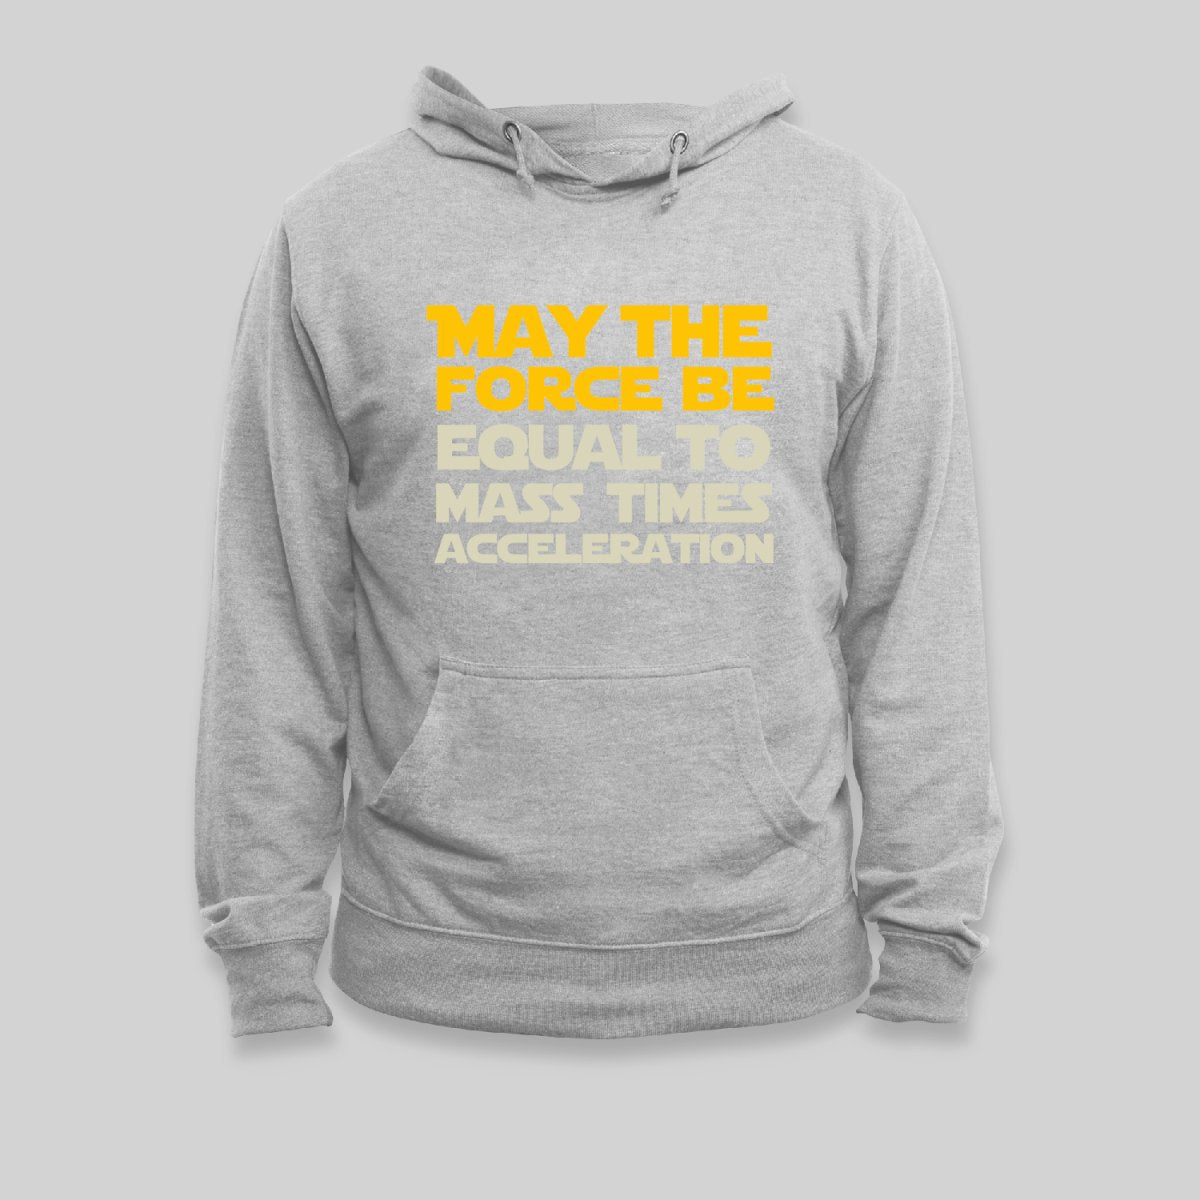 May the force be equal to mass times acceleration Hoodie - Geeksoutfit